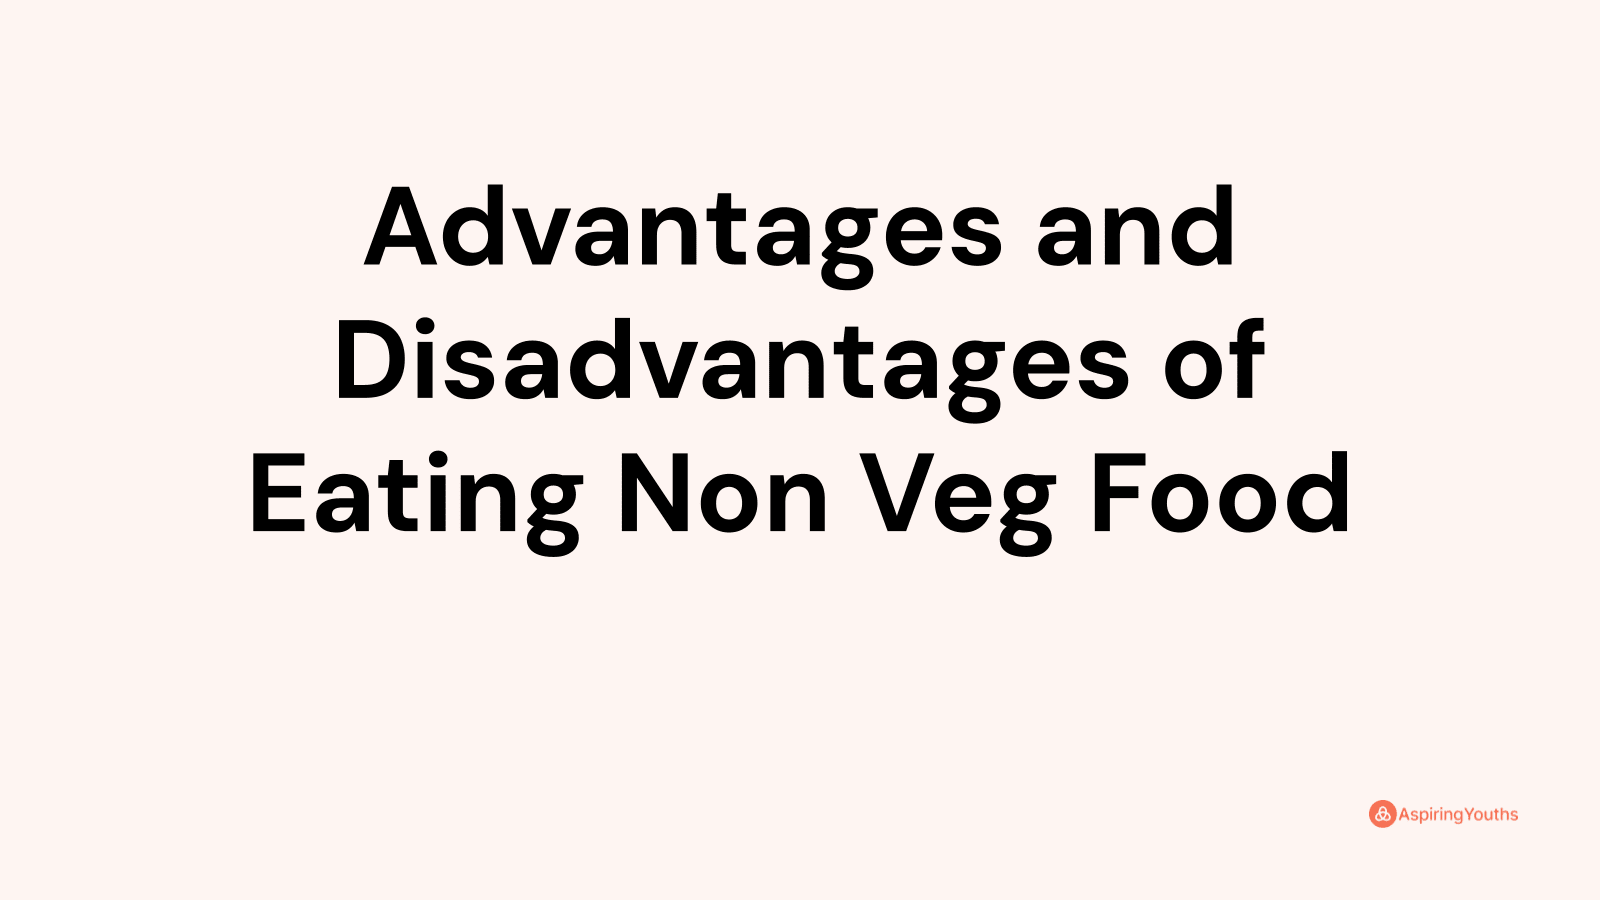 Advantages and disadvantages of Eating Non Veg Food